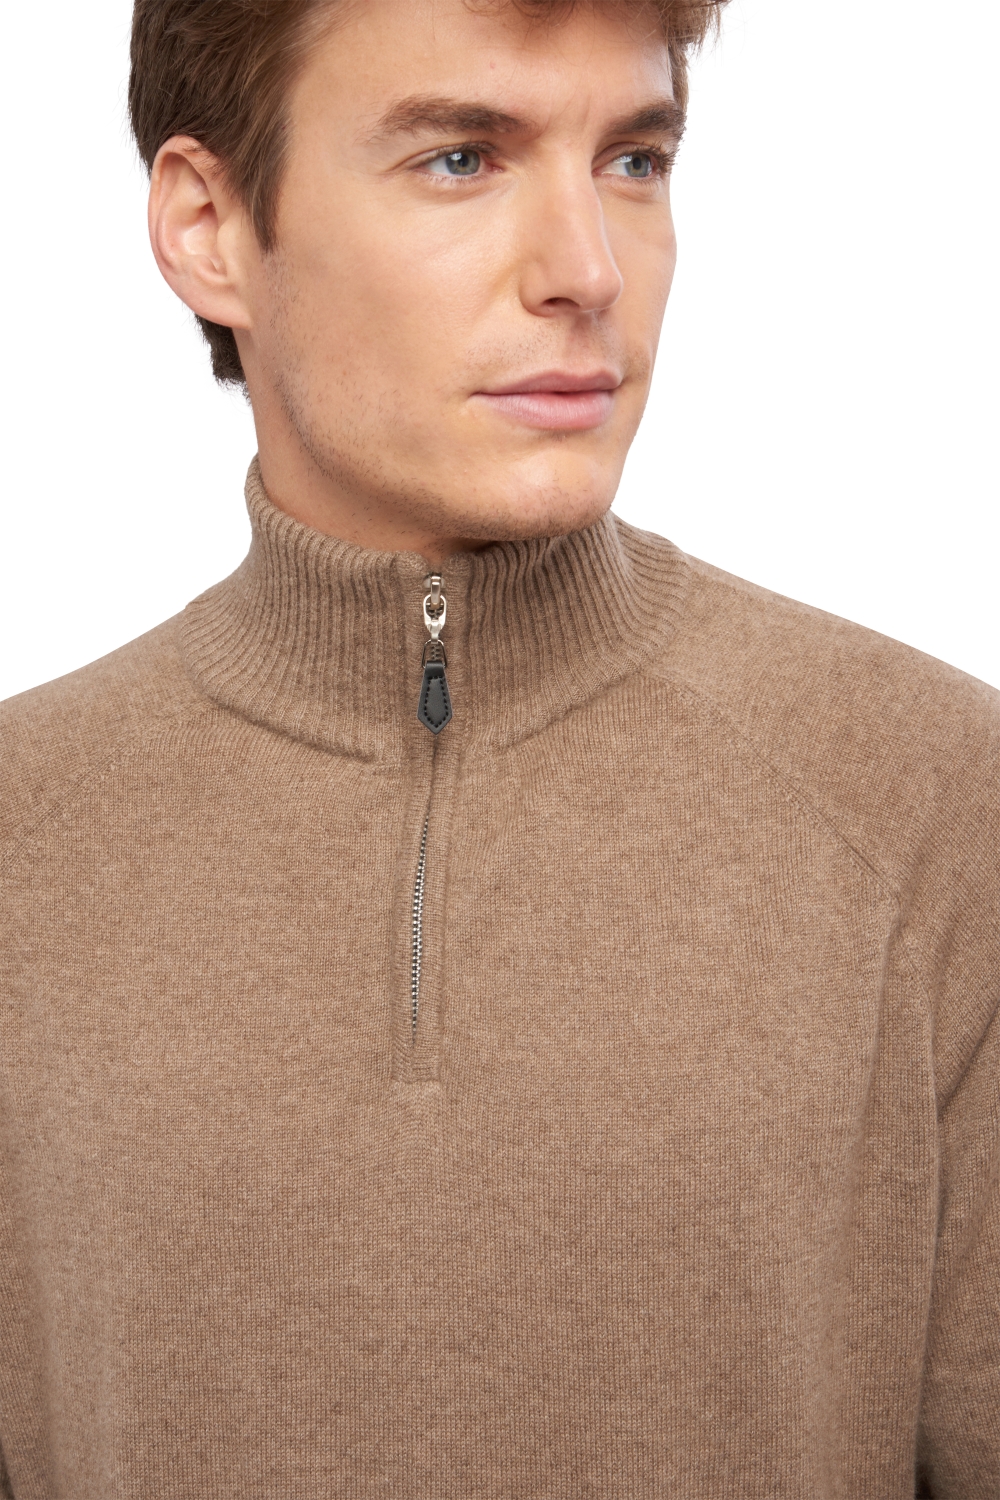 Cashmere men polo style sweaters vez natural terra m